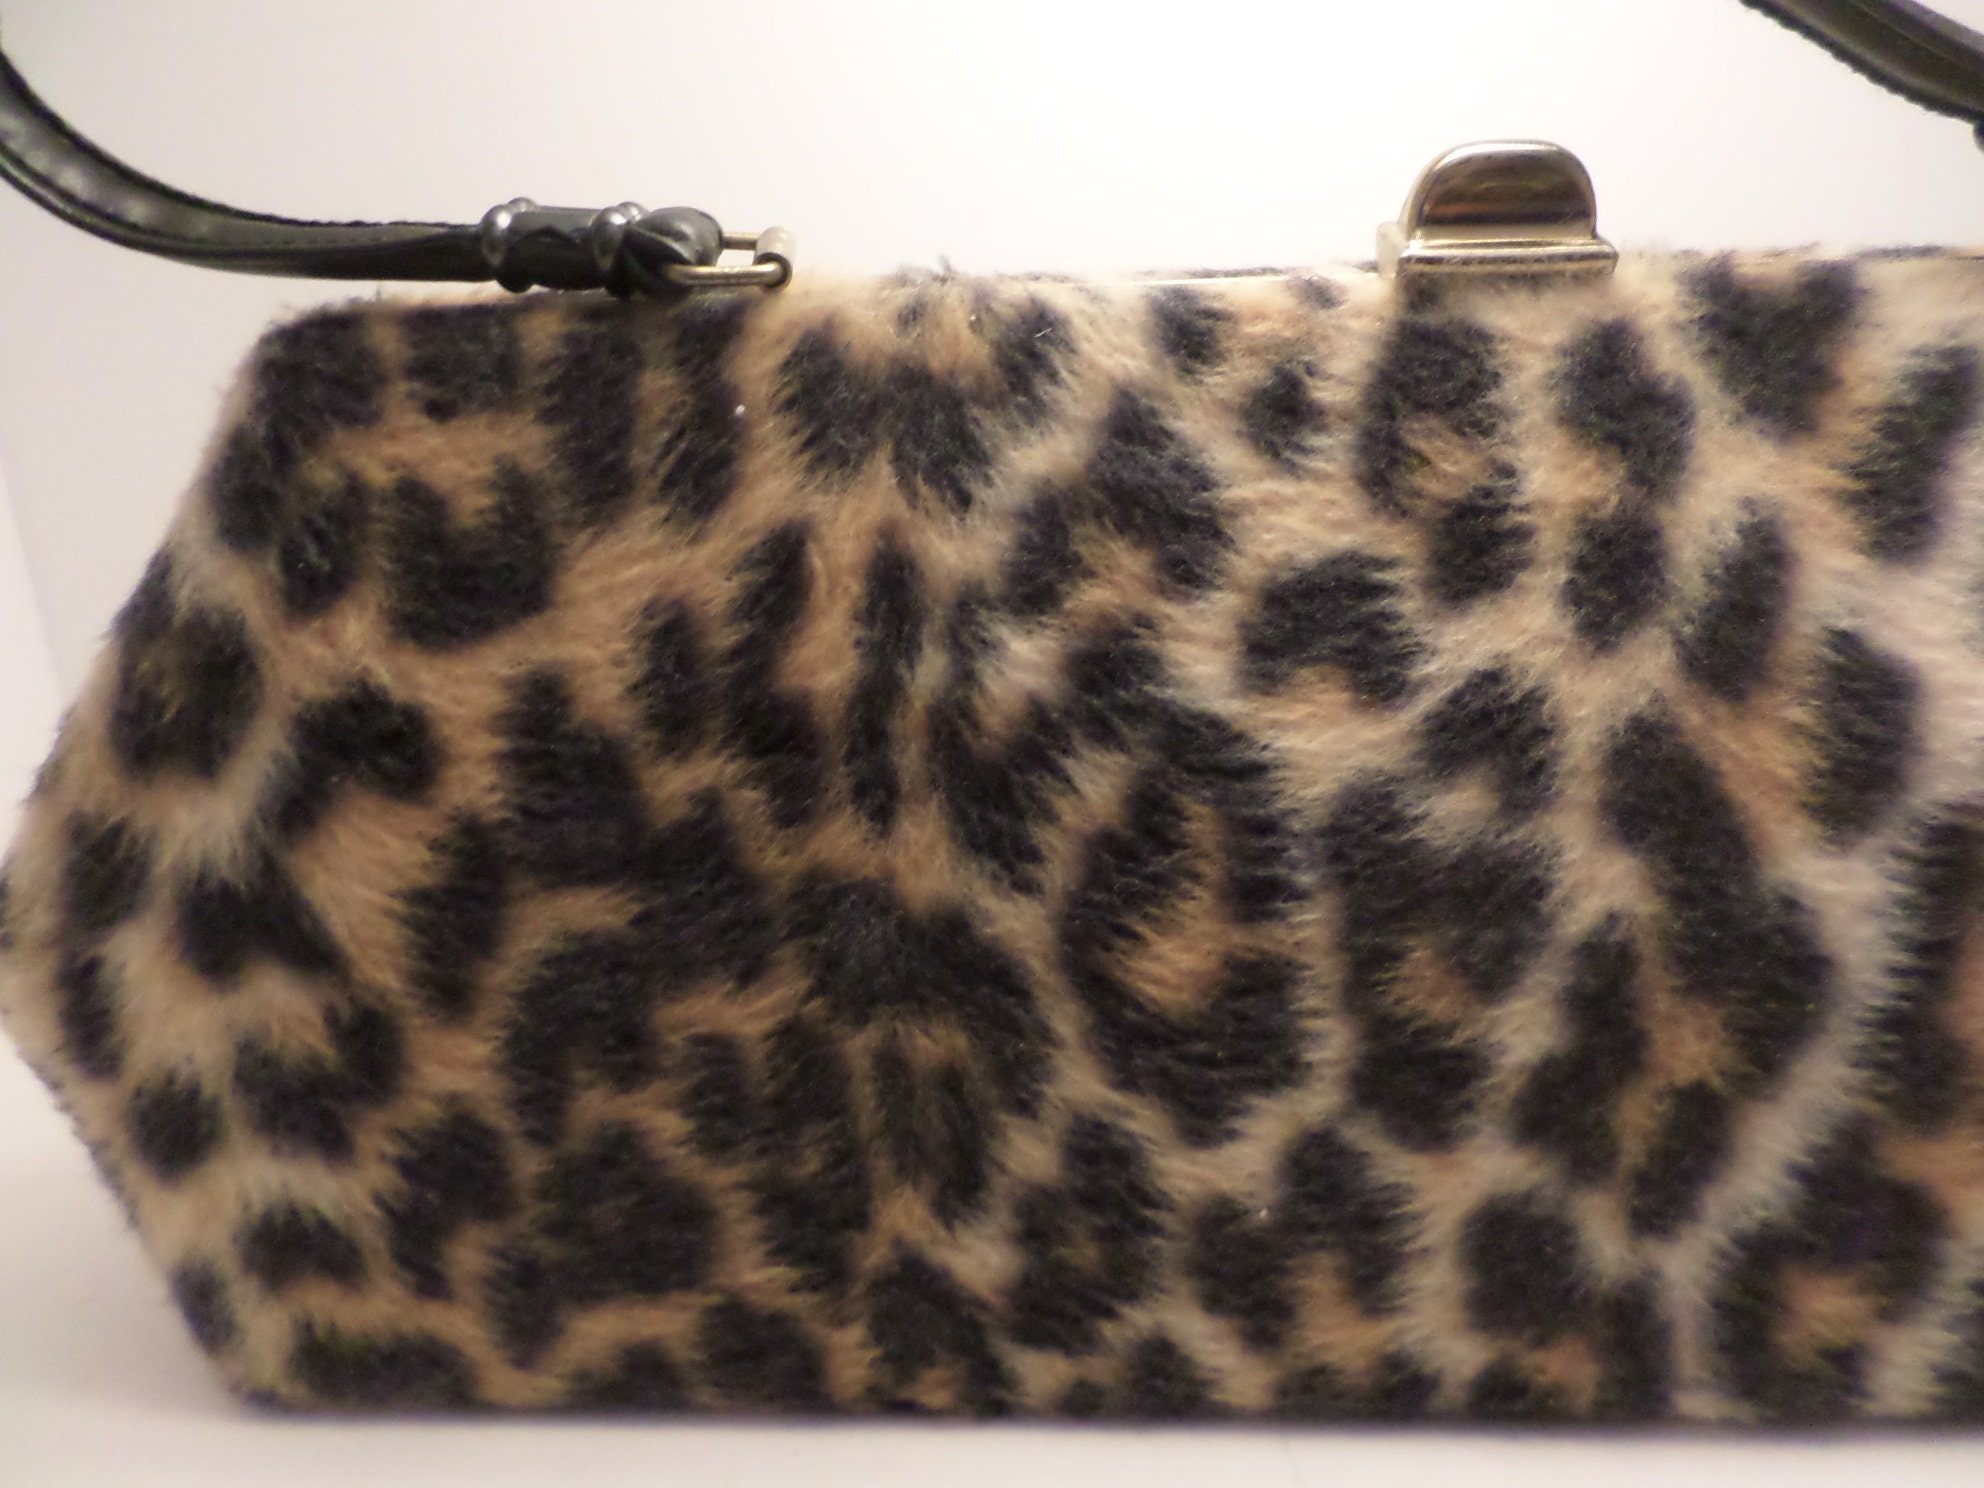 Vintage leopard faux fur purse from the 60's